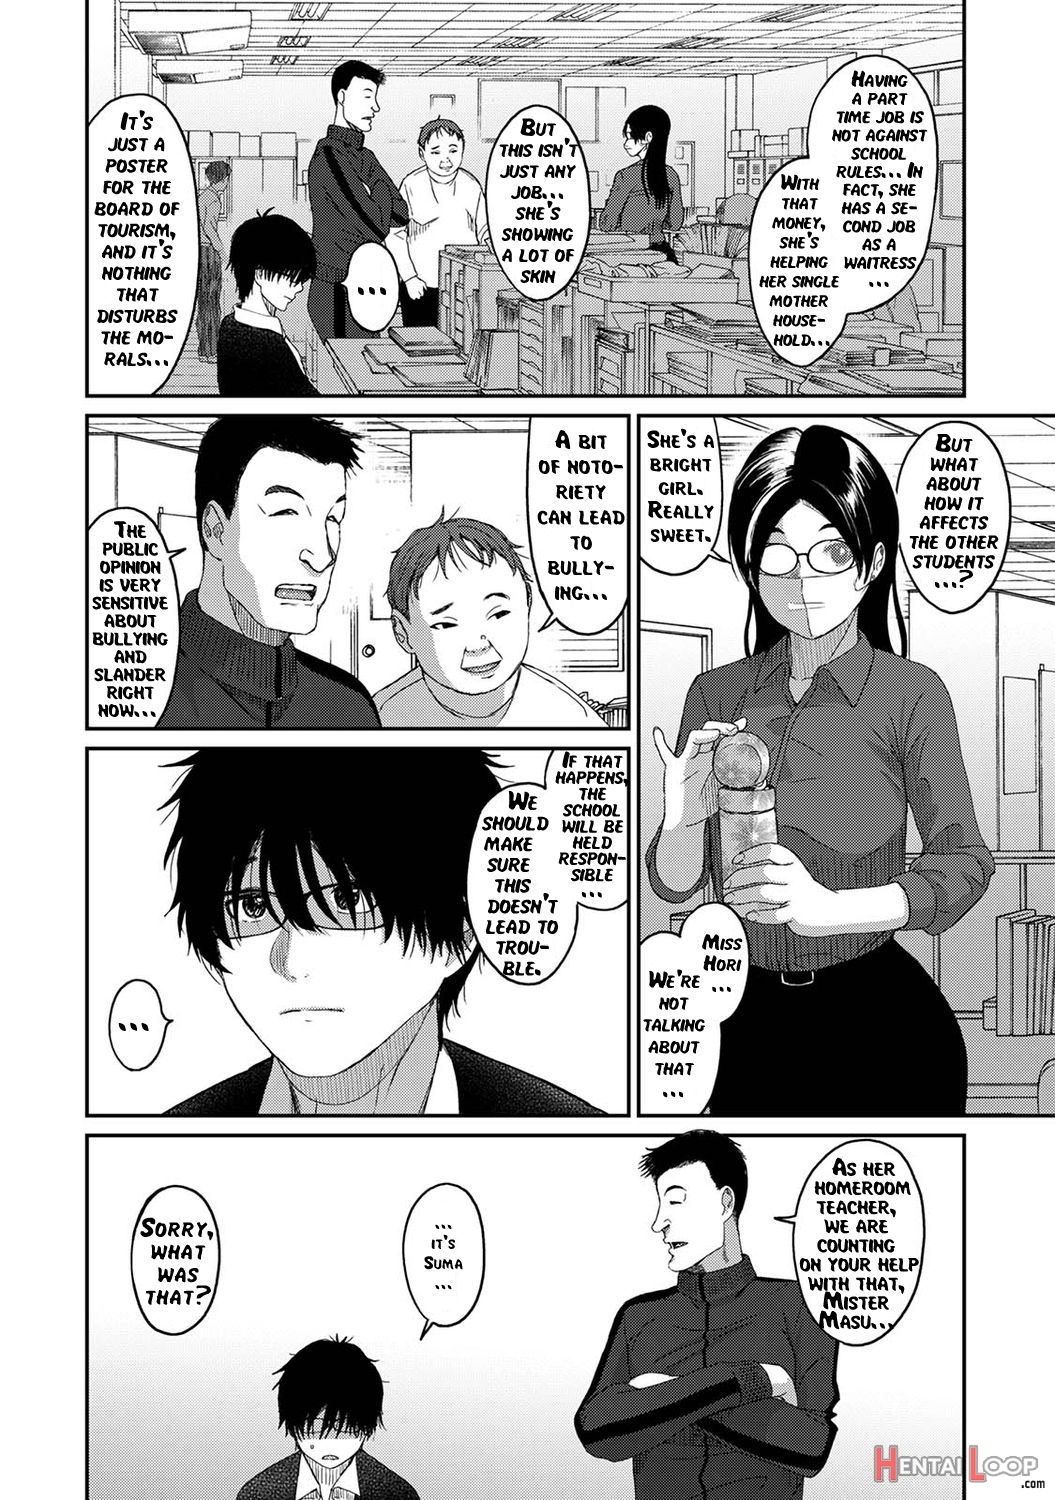 Itaiamai - Chapter 1 page 7